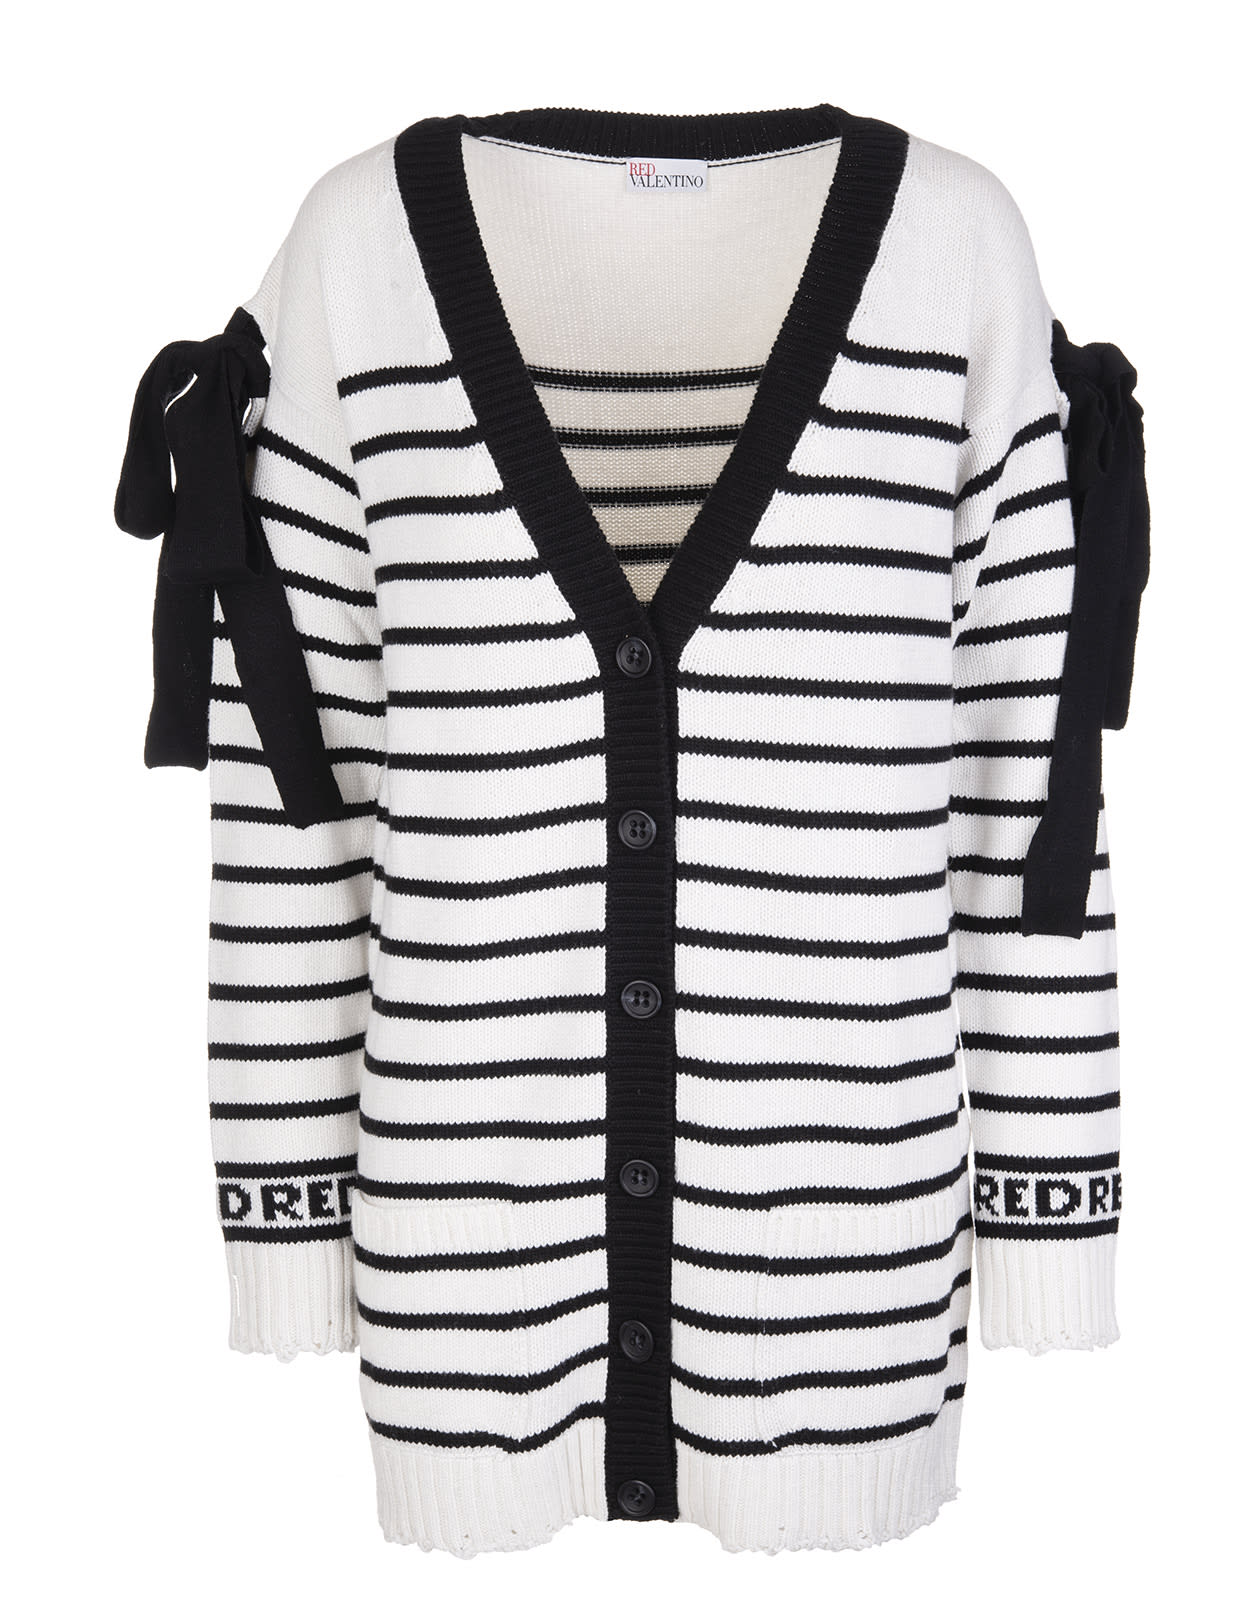 RED Valentino White Cardigan In Wool Blend With Black Stripes And Bows